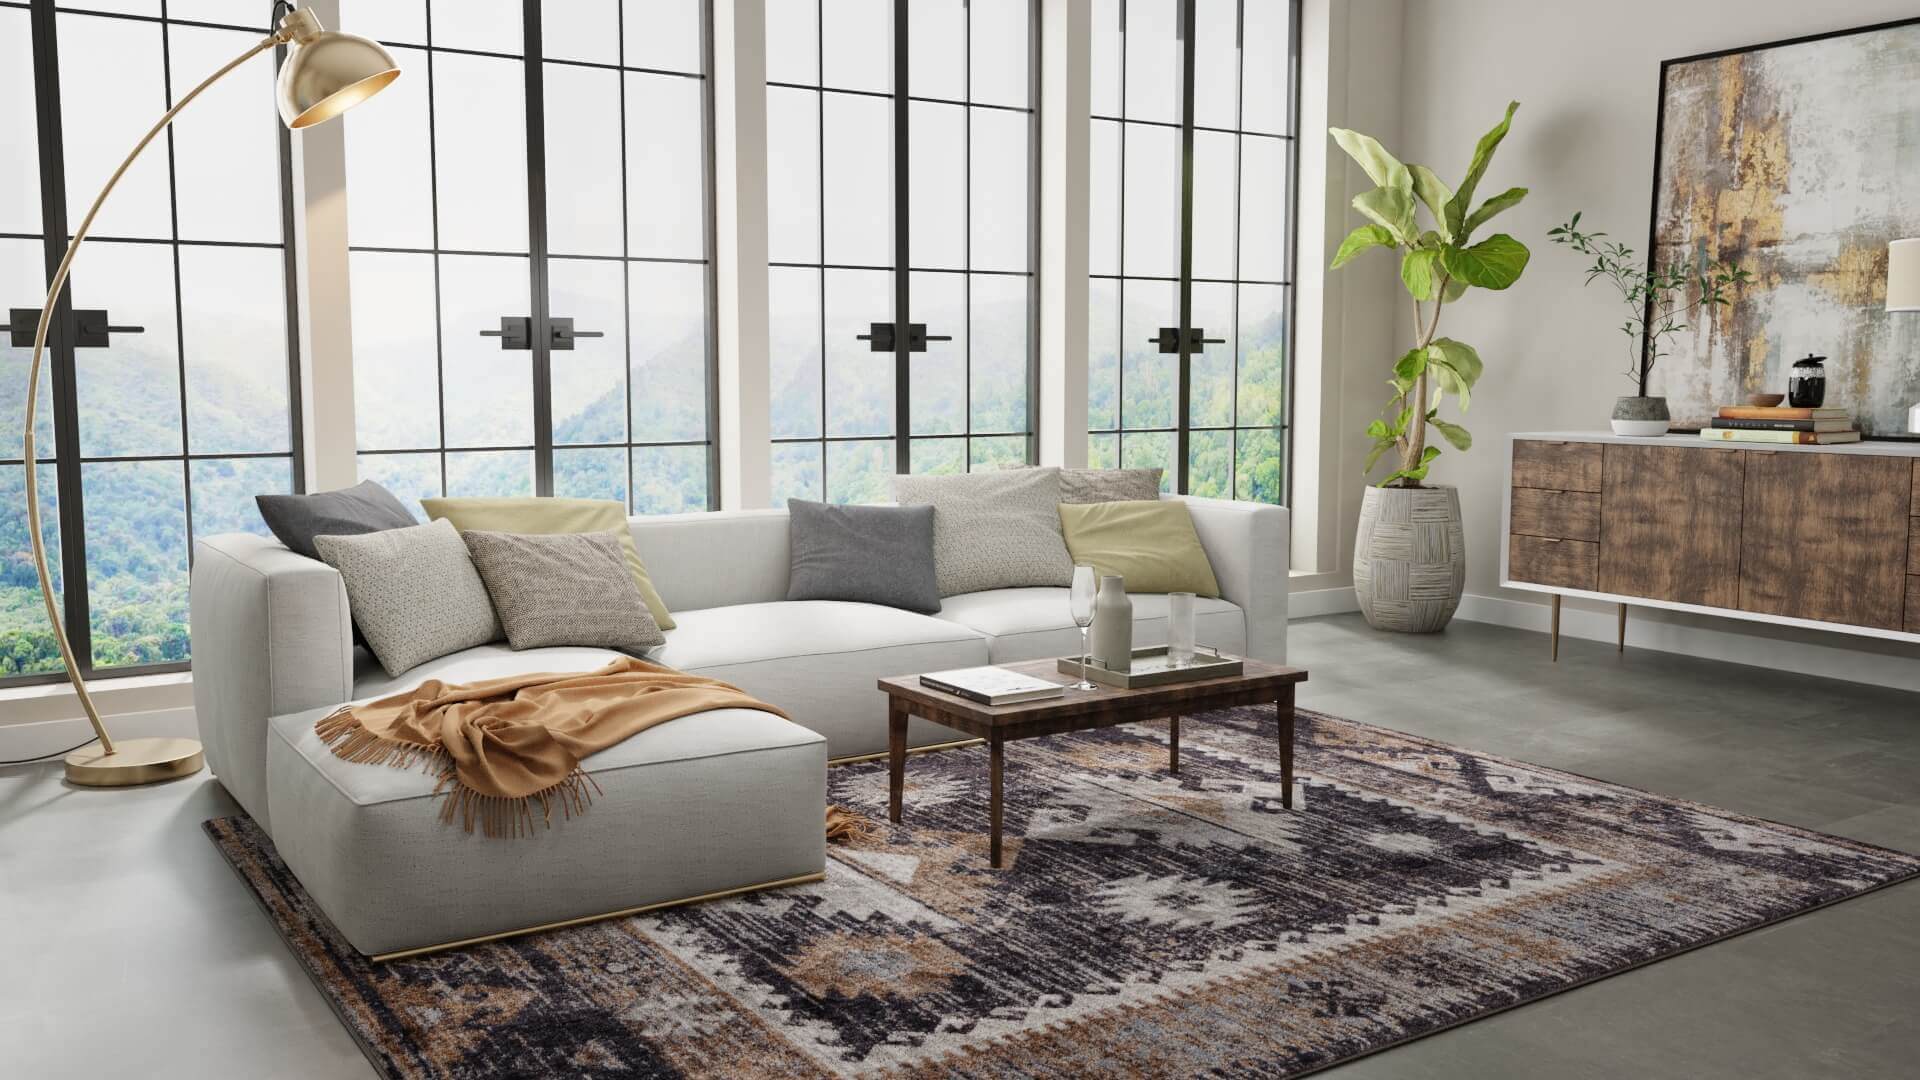 3D render of large geometric patterned rug by sofa sectional in modern living room made with imagine.io